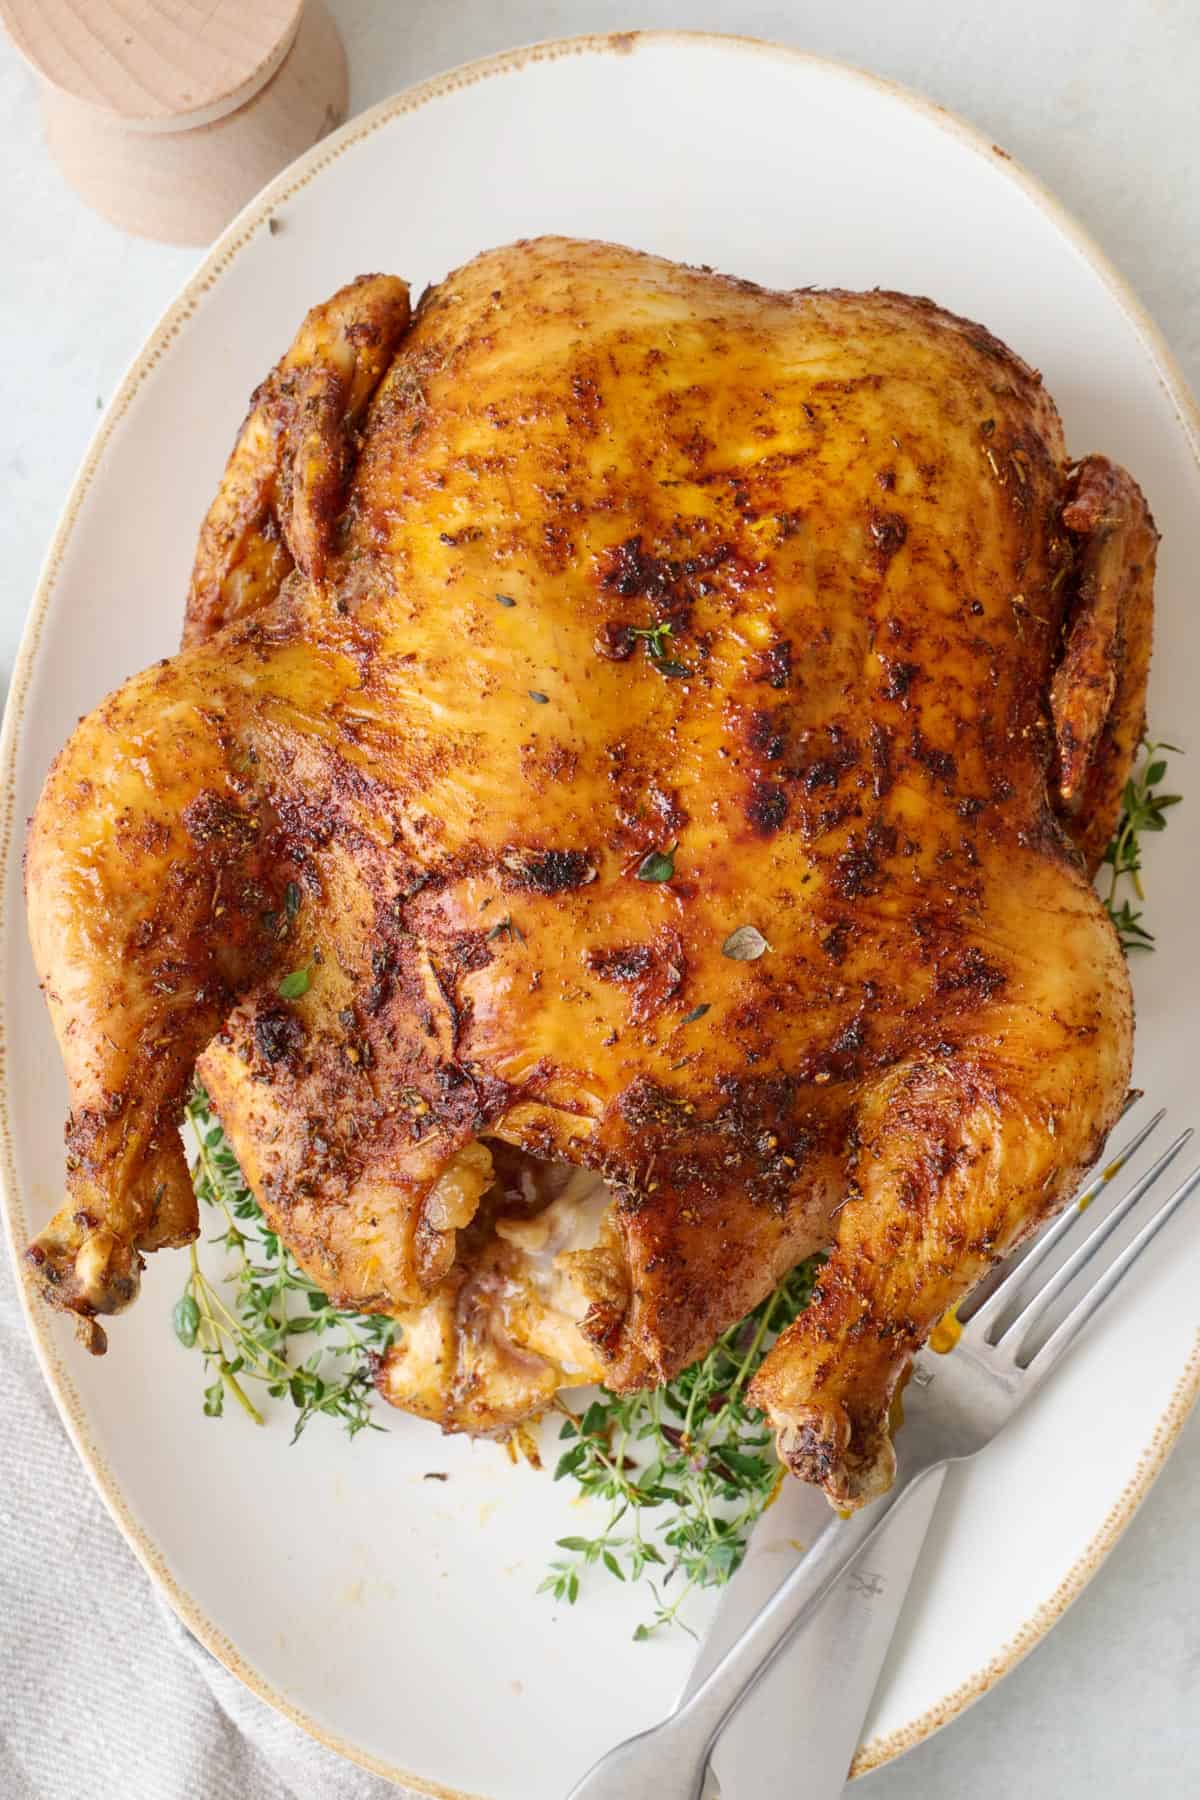 Air fryer whole chicken on serving platter with carving knife and fork.